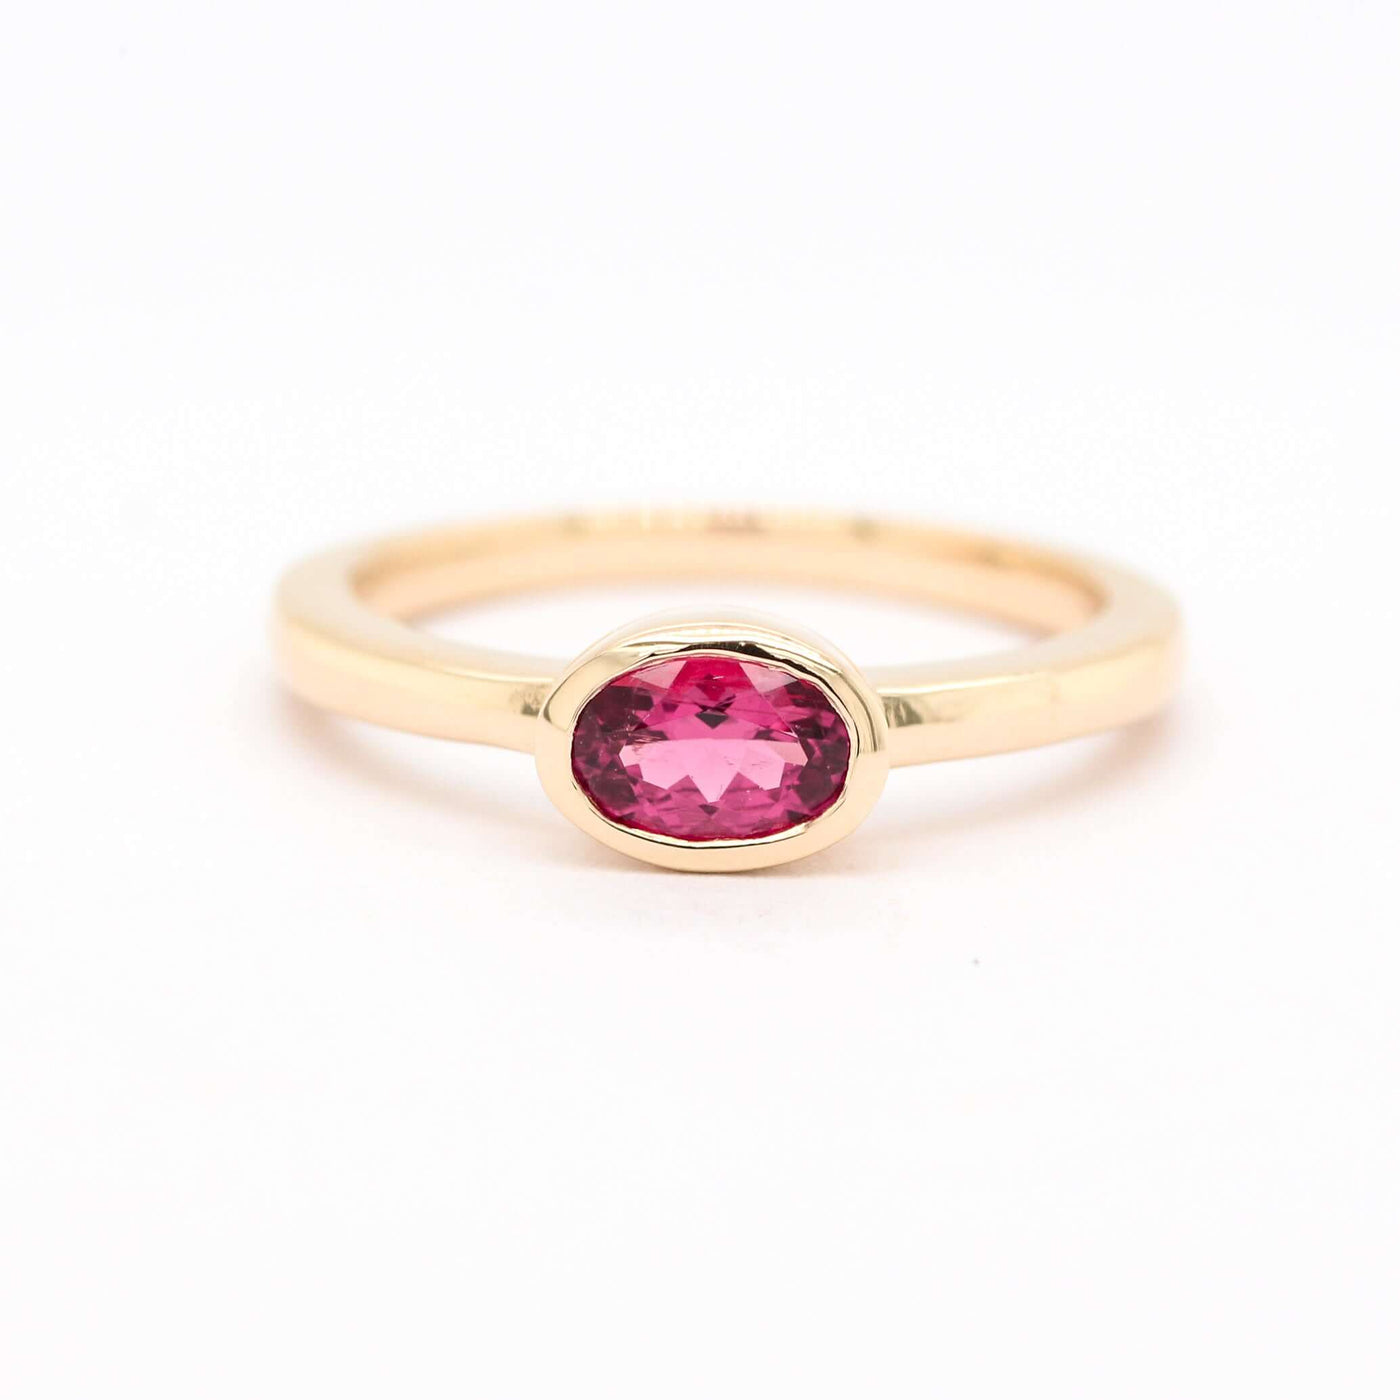 14KY .45 CT OVAL PINK TOURMALINE RING